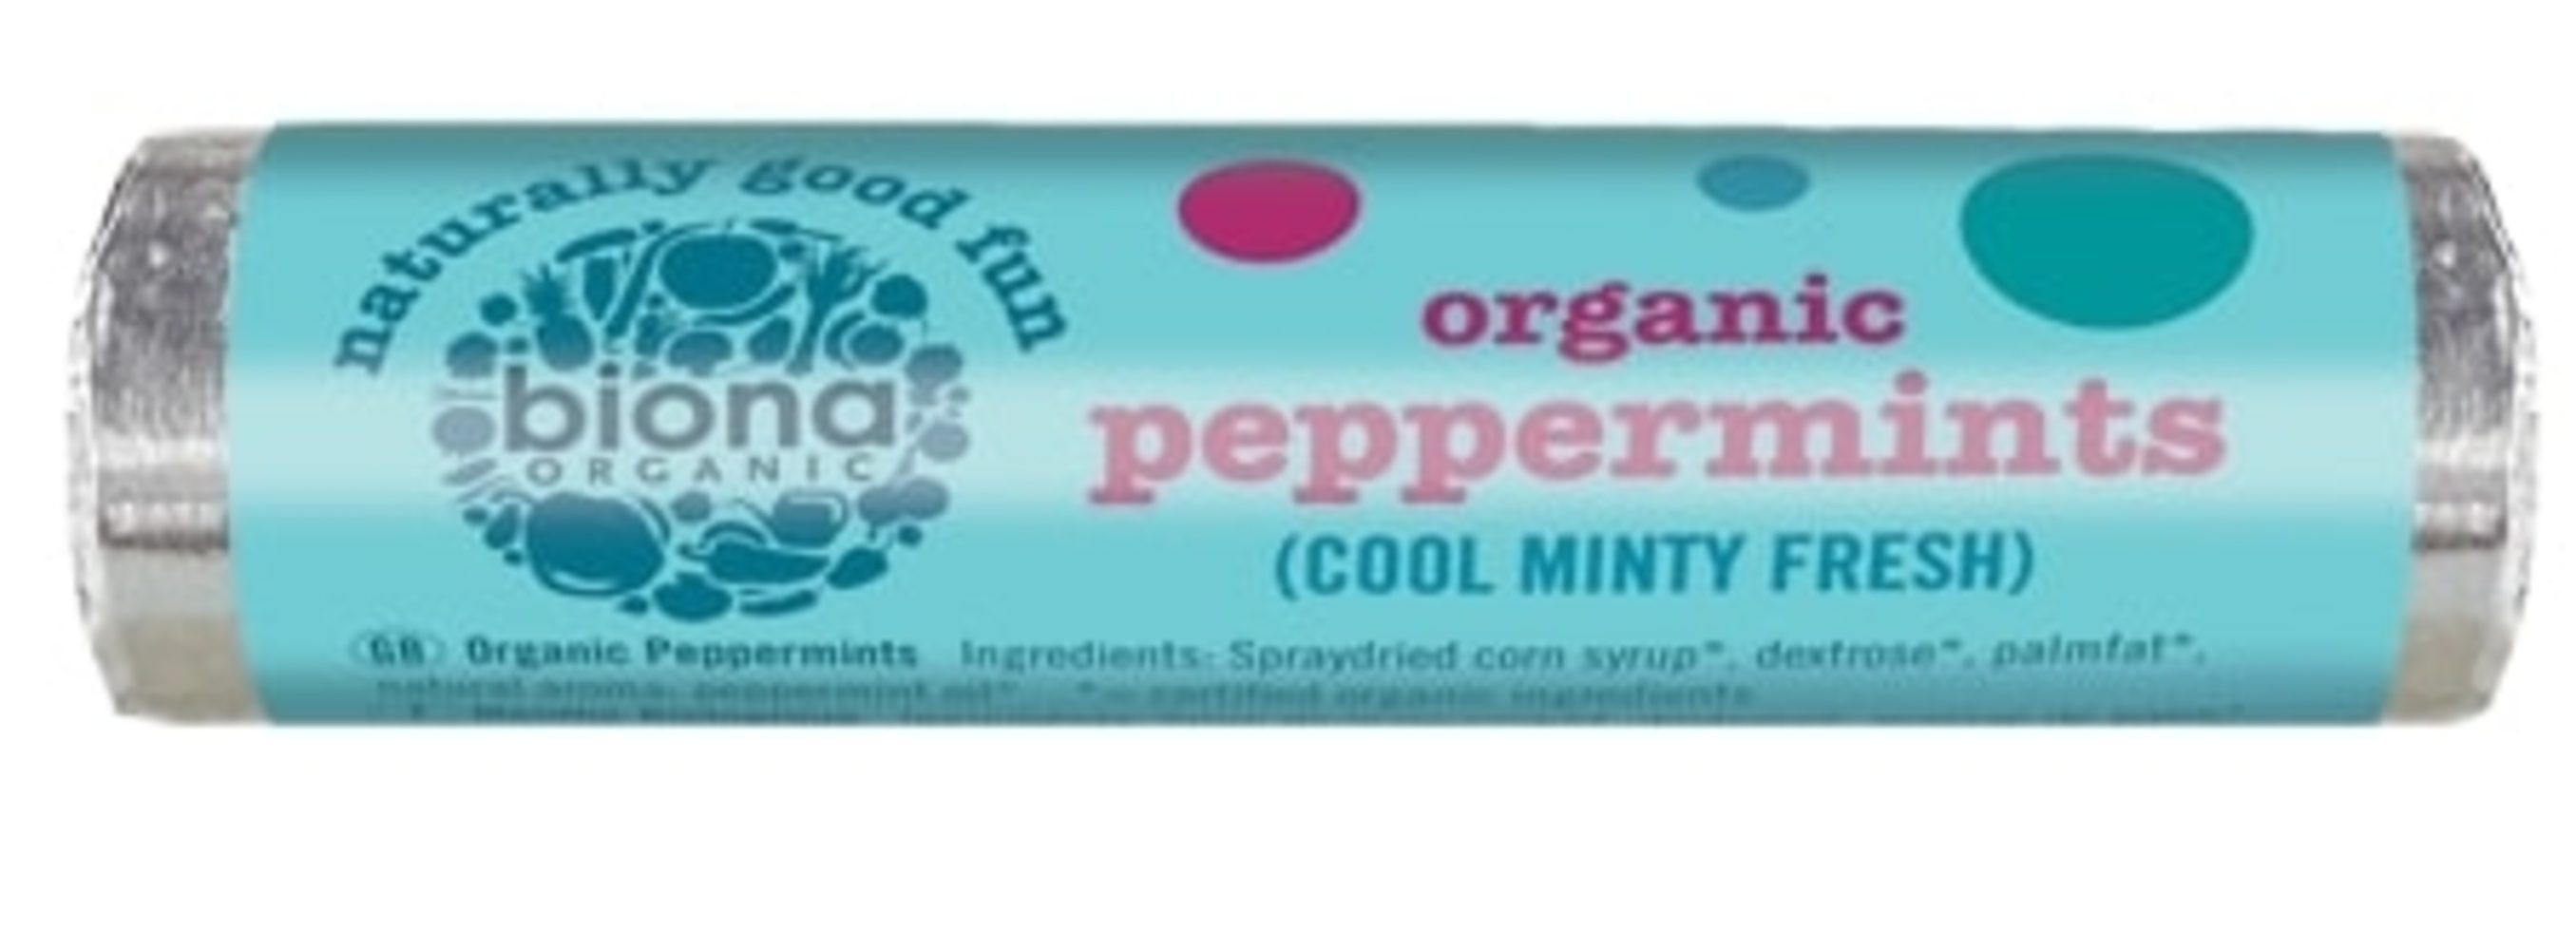 Org Peppermints